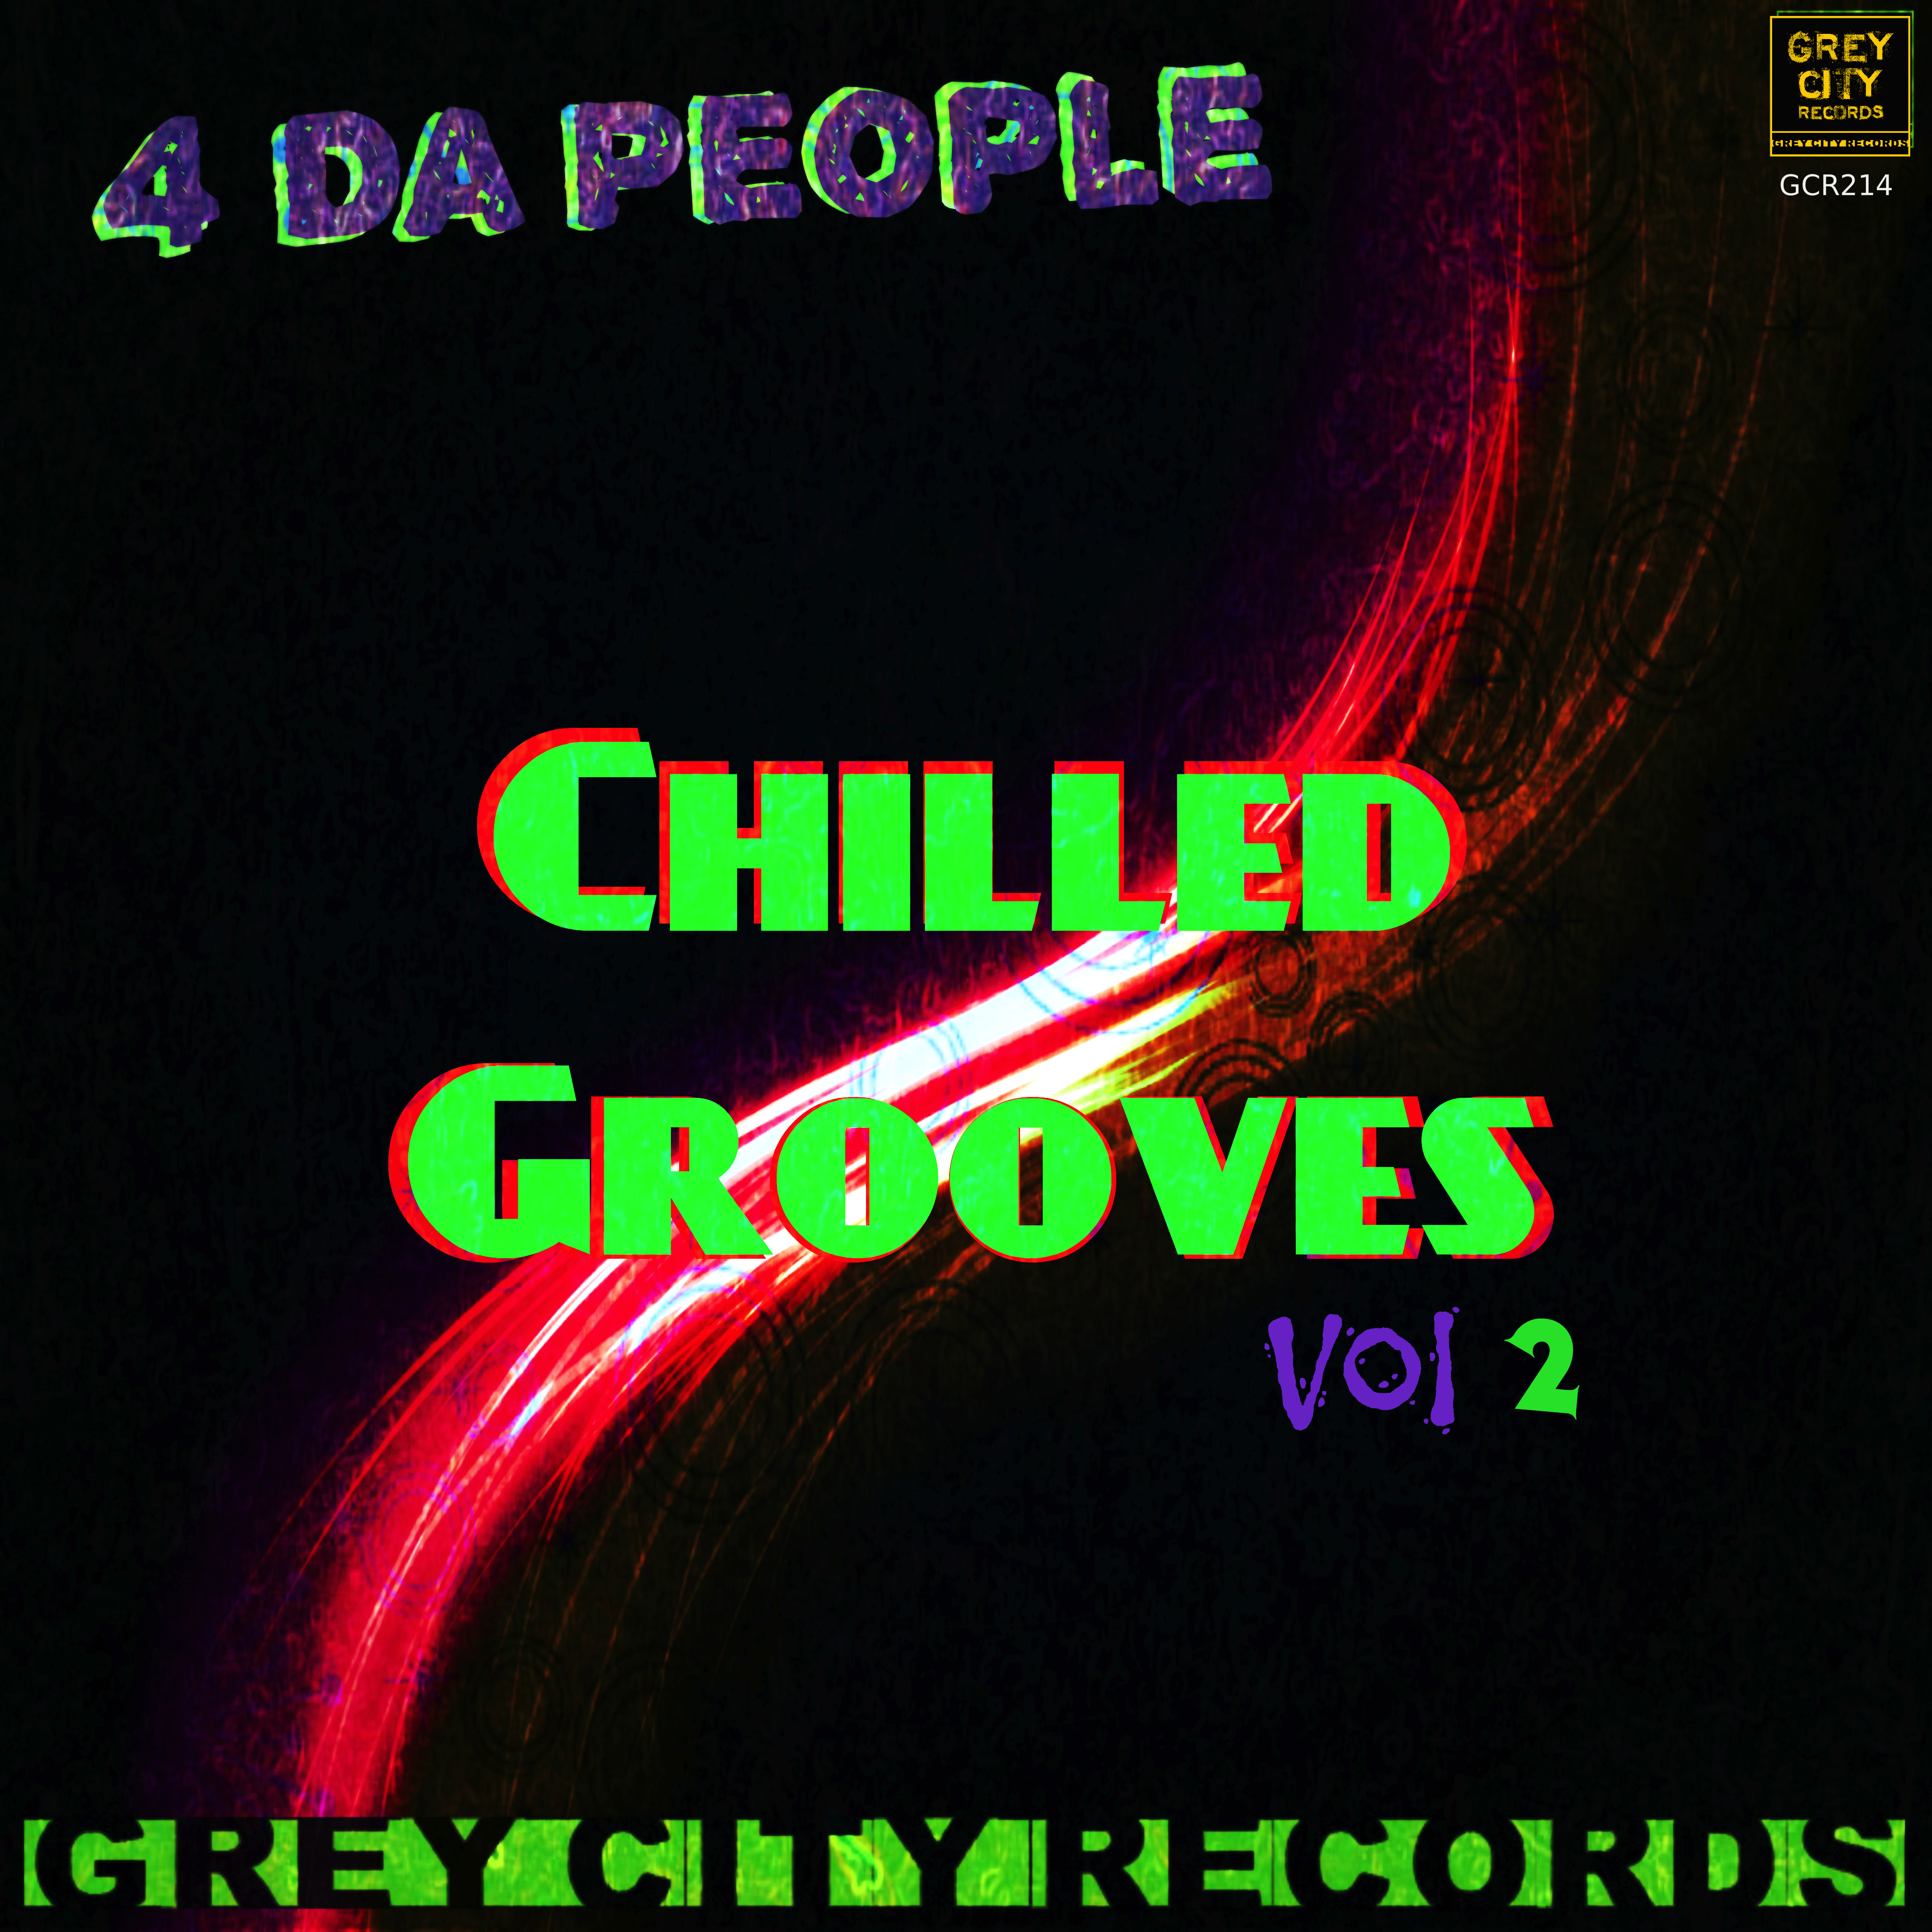 Chilled Grooves, Vol. 2